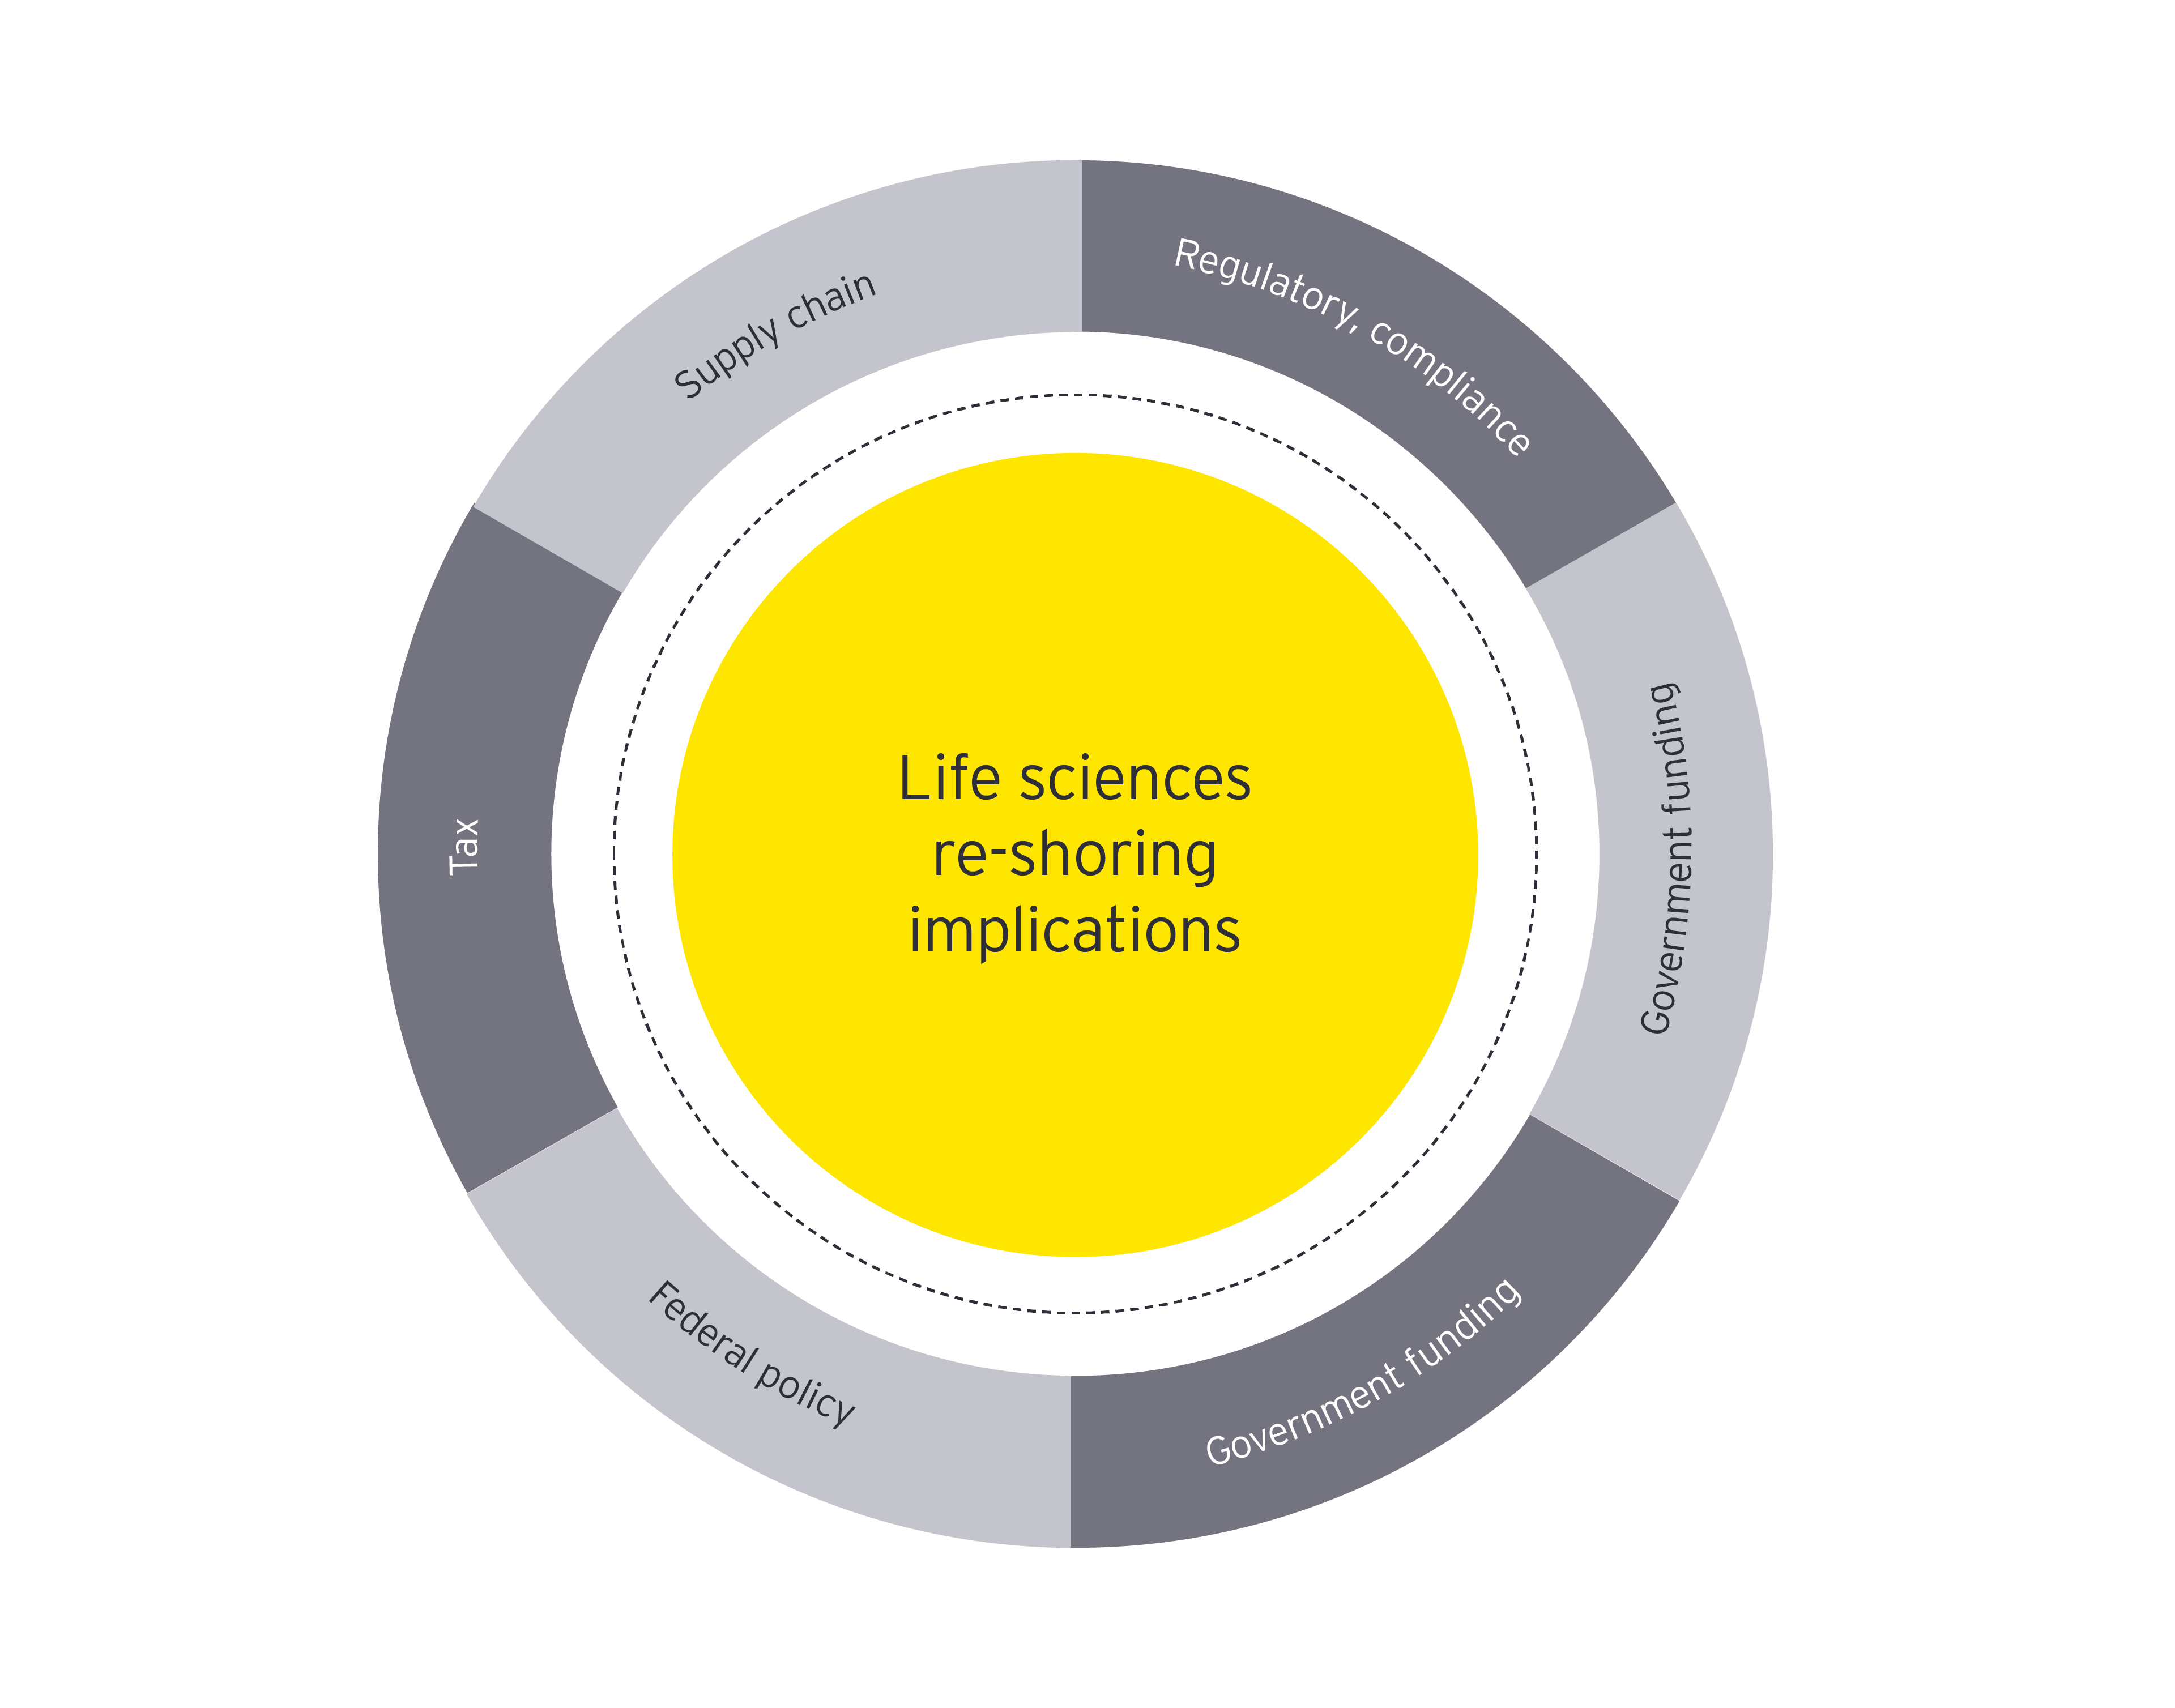 Life sciences re-shoring implications